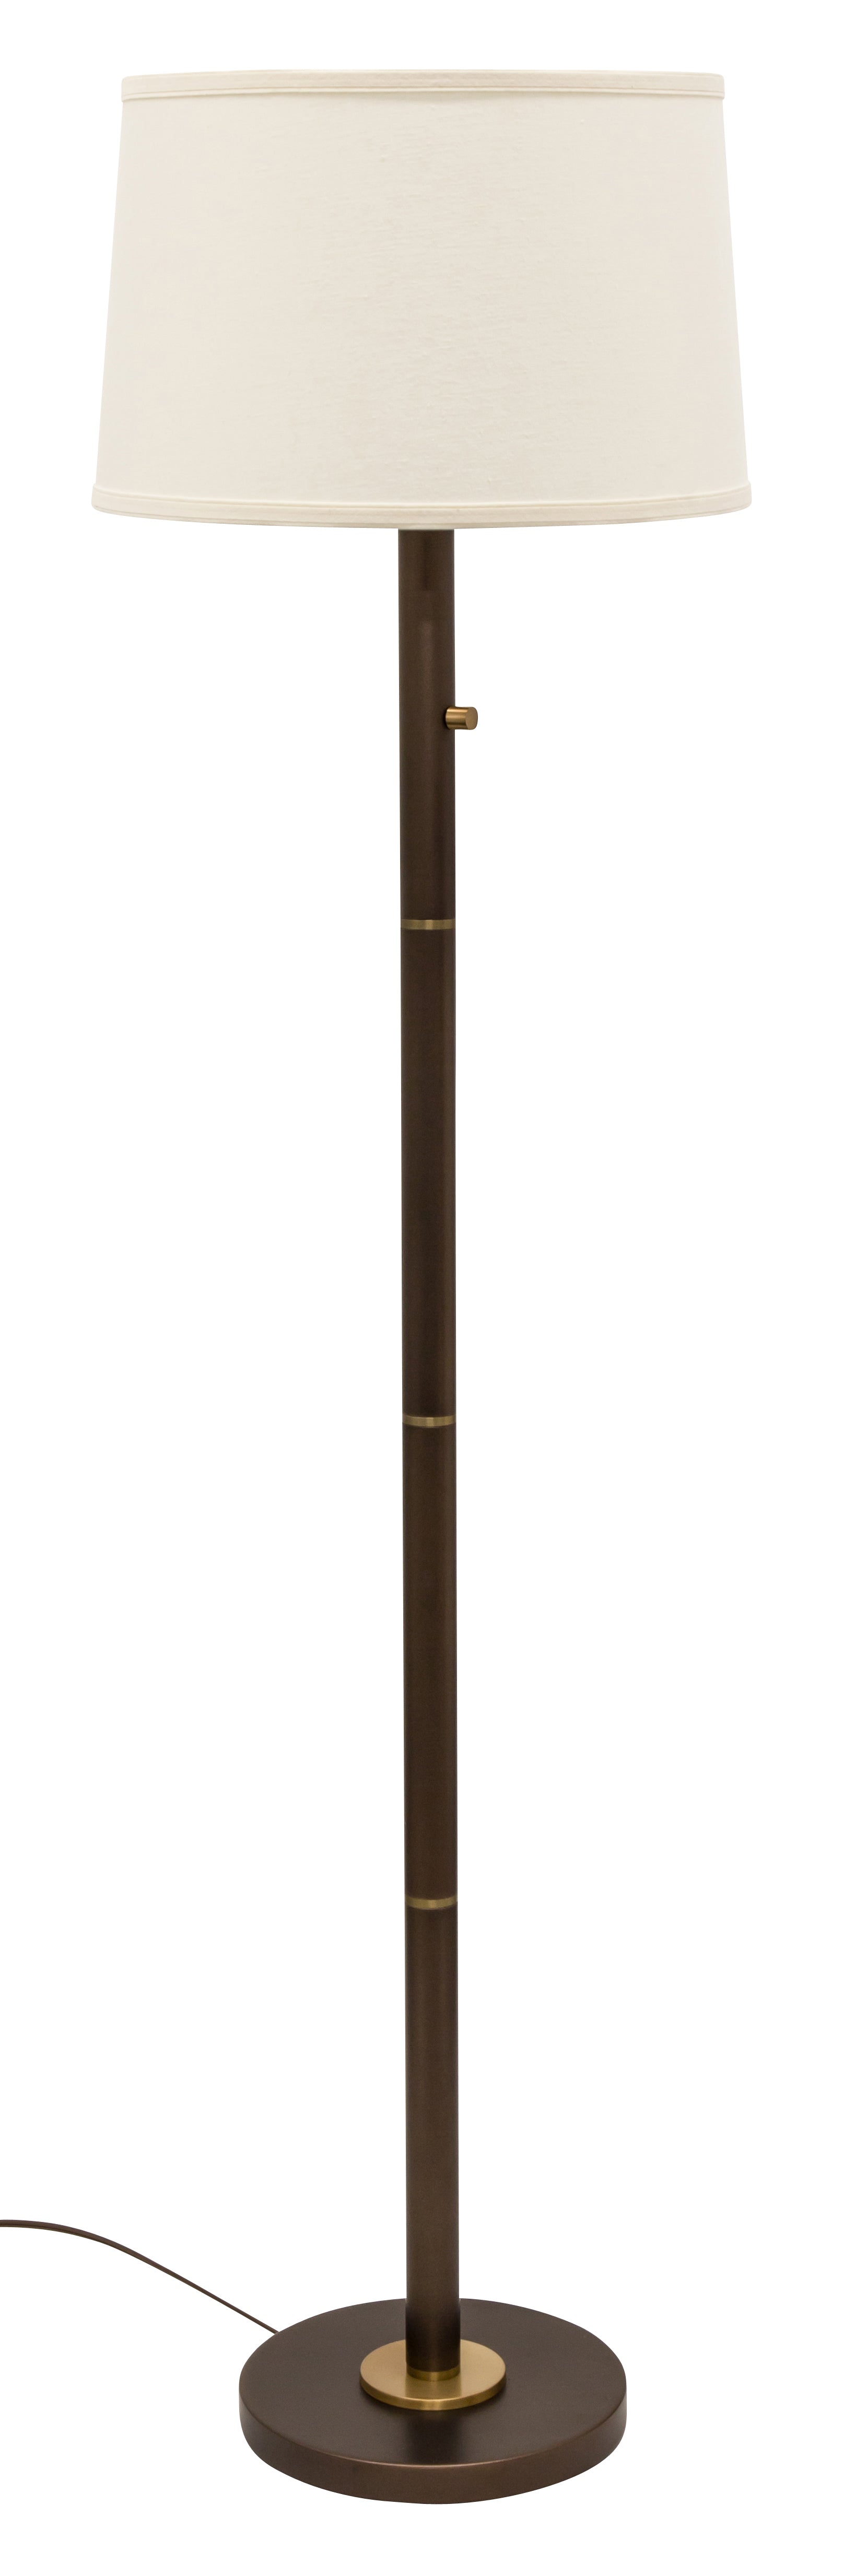 House of Troy Rupert three way floor lamp in chestnut bronze with weathered brass accents RU703-CHB